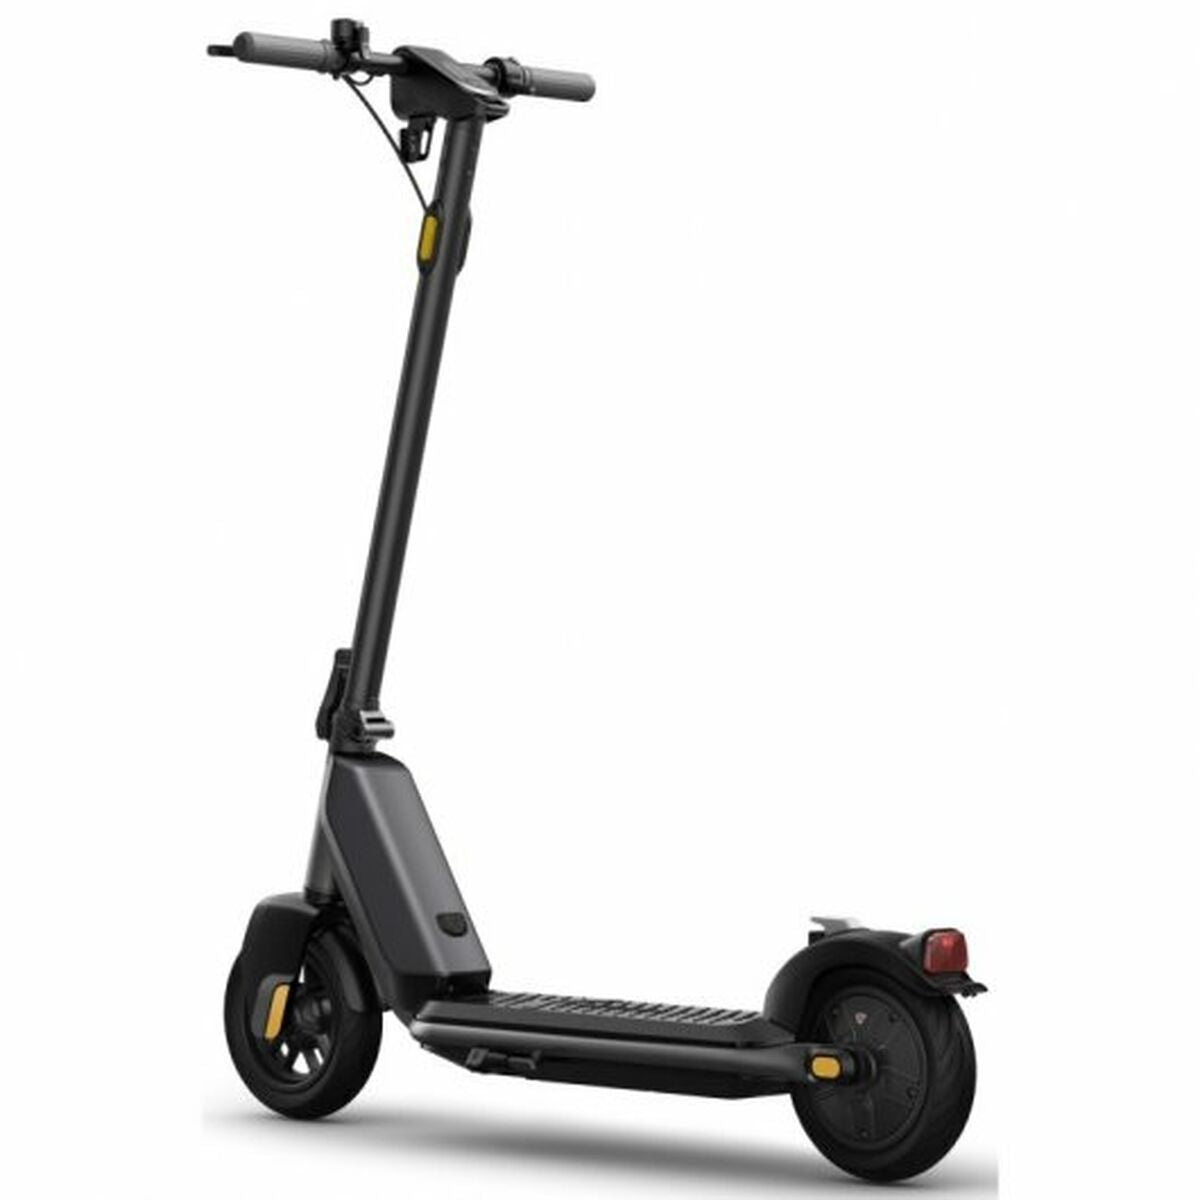 Electric Scooter Niu KQi1 Pro 250 W 9" 25 km/h Grey, Niu, Sports and outdoors, Urban mobility, electric-scooter-niu-kqi1-pro-250-w-9-25-km-h-grey, Brand_Niu, category-reference-2609, category-reference-2629, category-reference-2904, category-reference-t-19681, category-reference-t-19756, category-reference-t-19876, category-reference-t-21245, category-reference-t-25387, Condition_NEW, deportista / en forma, Price_500 - 600, RiotNook